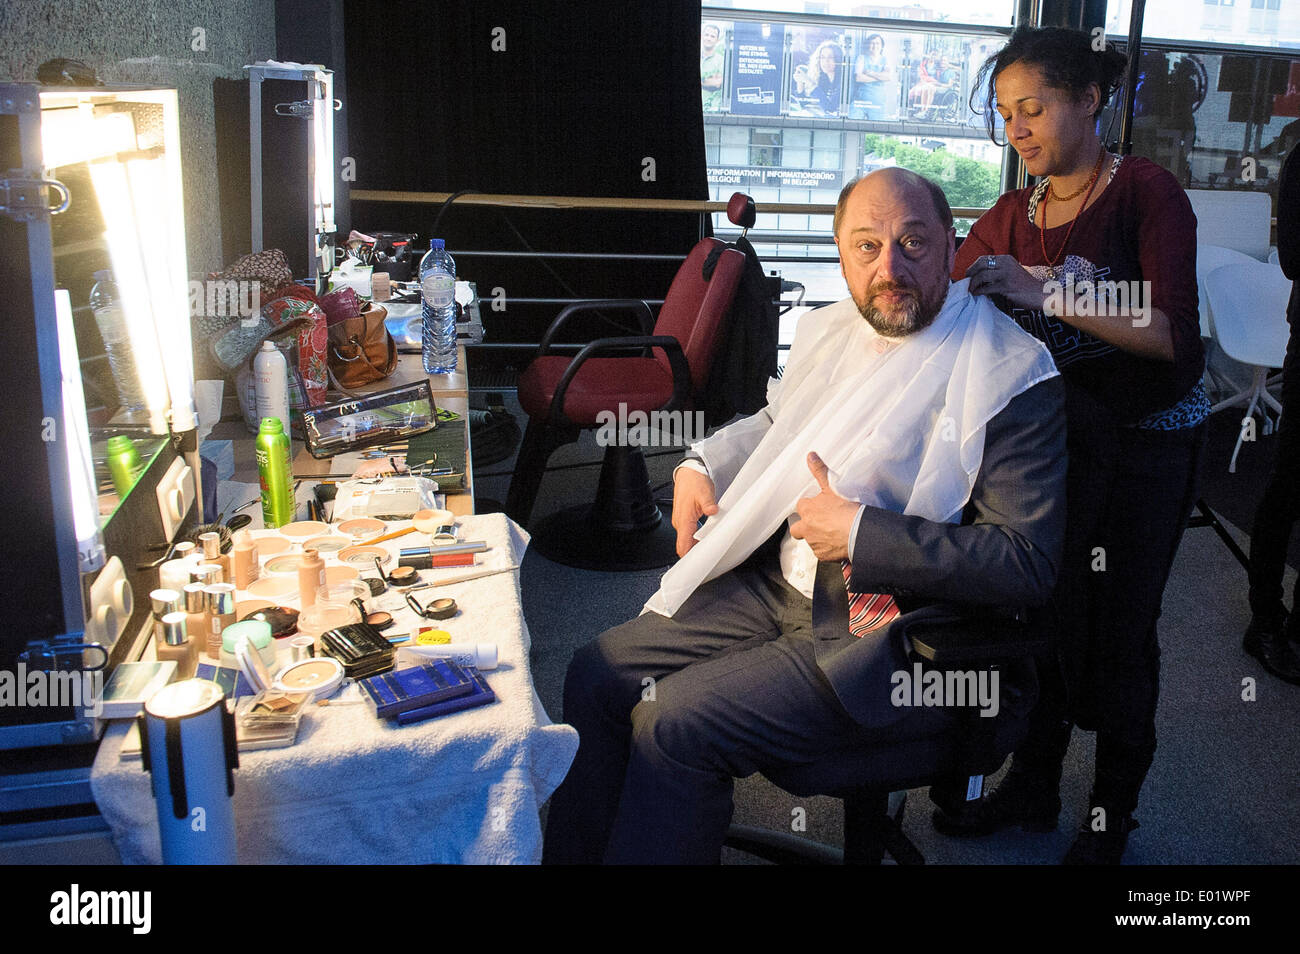 Brussels, Belgium. 29th April 2014. Martin Schulz, top candidate of the Party of European Socialists (PSE) for the upcoming European elections, receives the make-up ahead of Euranet's 'Big Crunch' Presidential debate at the EU parliament in BrusselsThe four top candidates for the presidency of the European Commission - Jean-Claude Juncker, Ska Keller, Martin Schulz and Guy Verhofstadt - attend EU-wide debate organized by EuranetPlus and focused on the major election topics. Credit:  dpa picture alliance/Alamy Live News Stock Photo